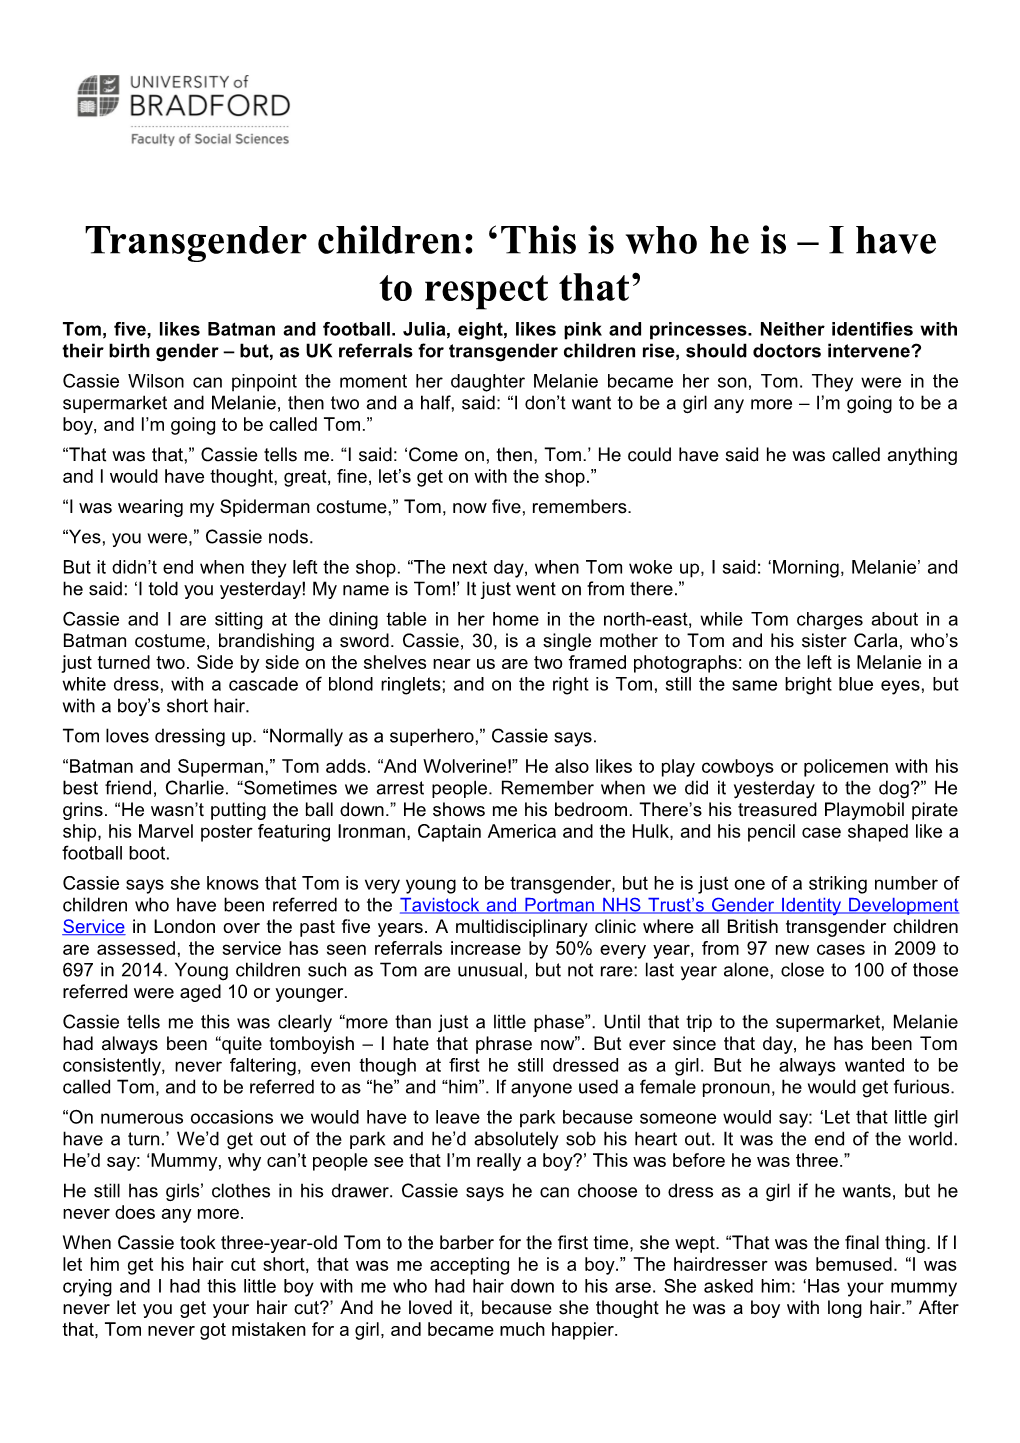 Transgender Children: This Is Who He Is I Have to Respect That